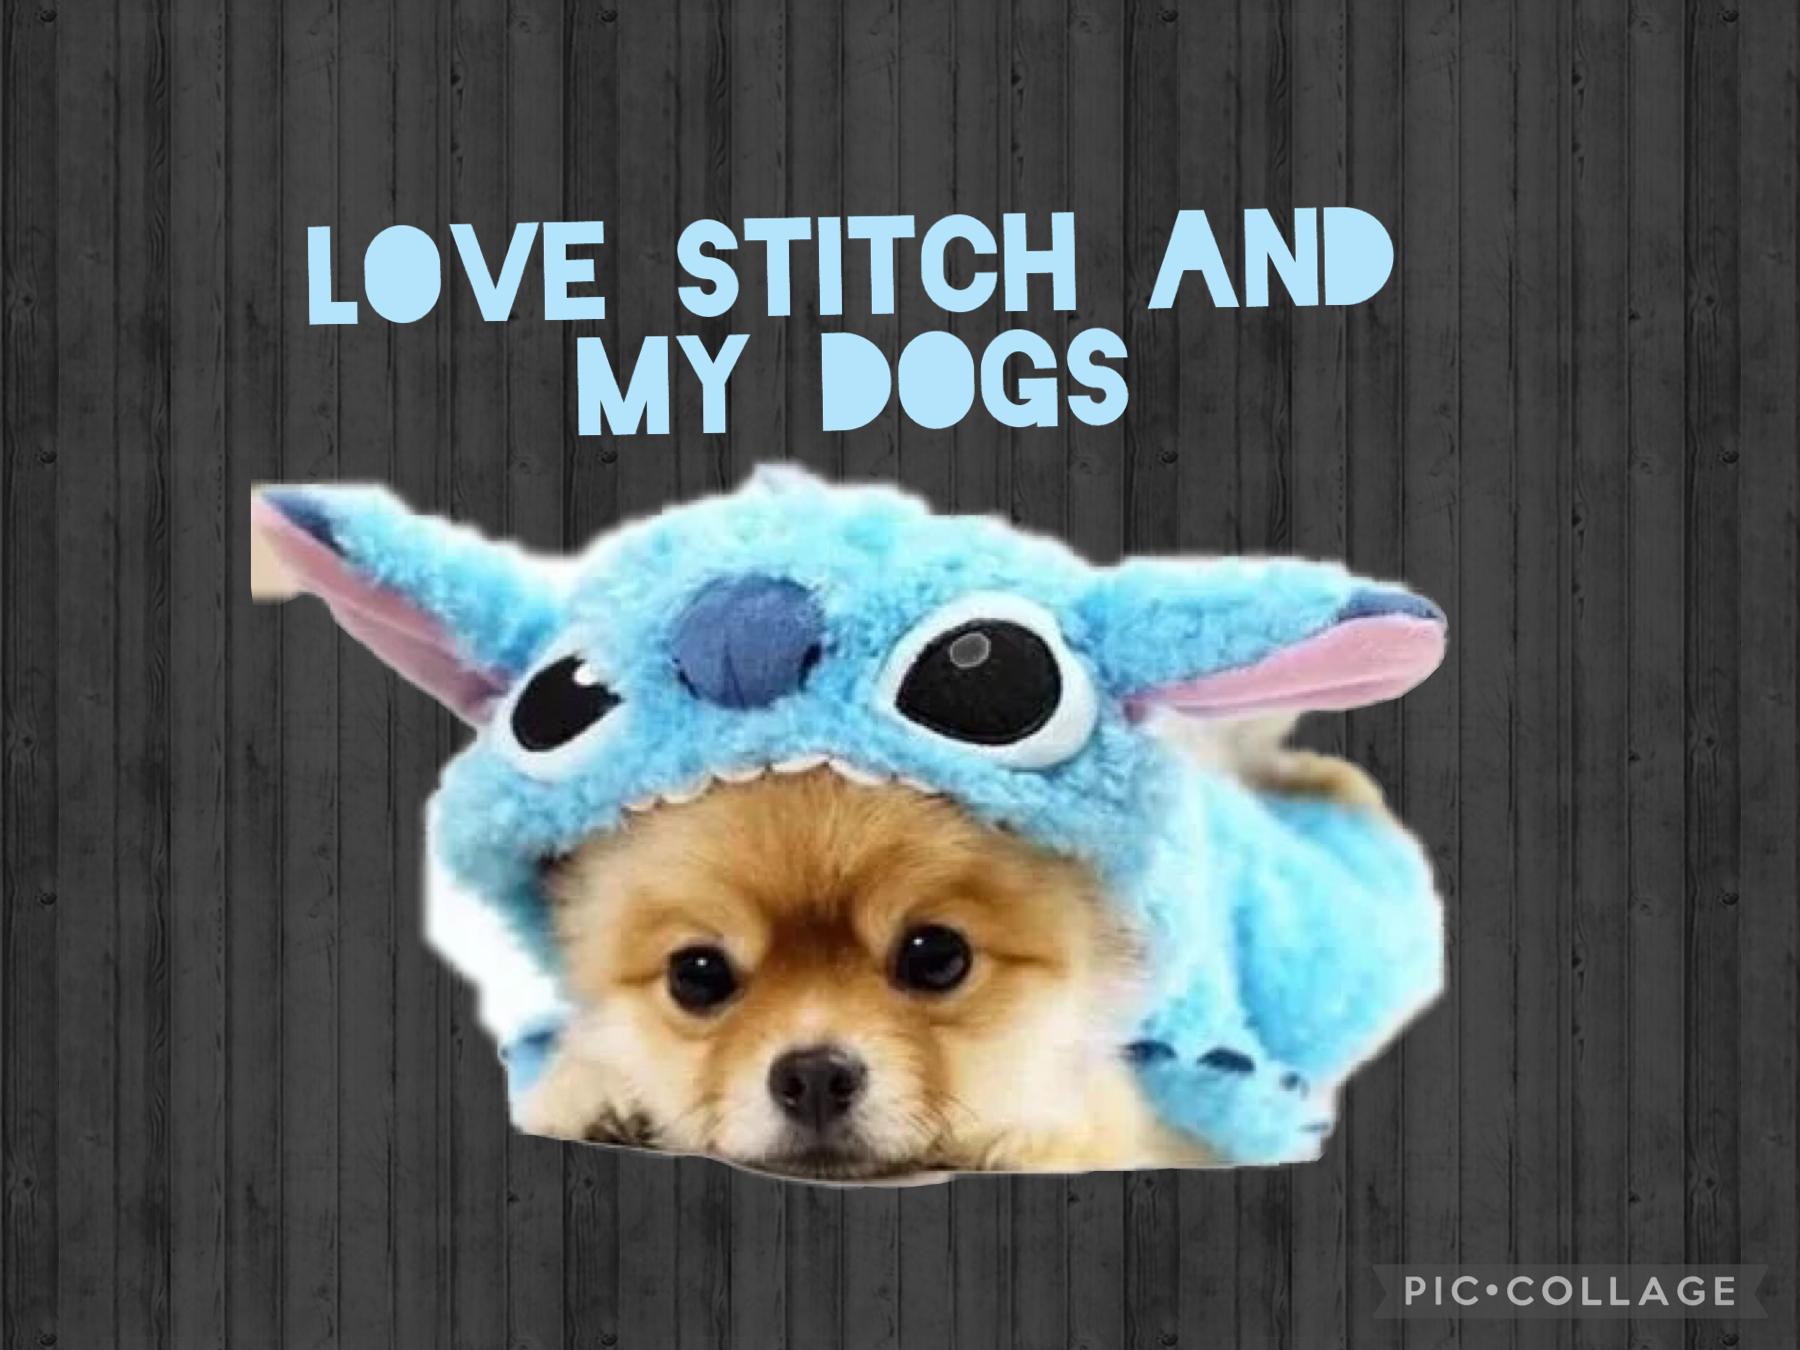 Dogs and stitch 